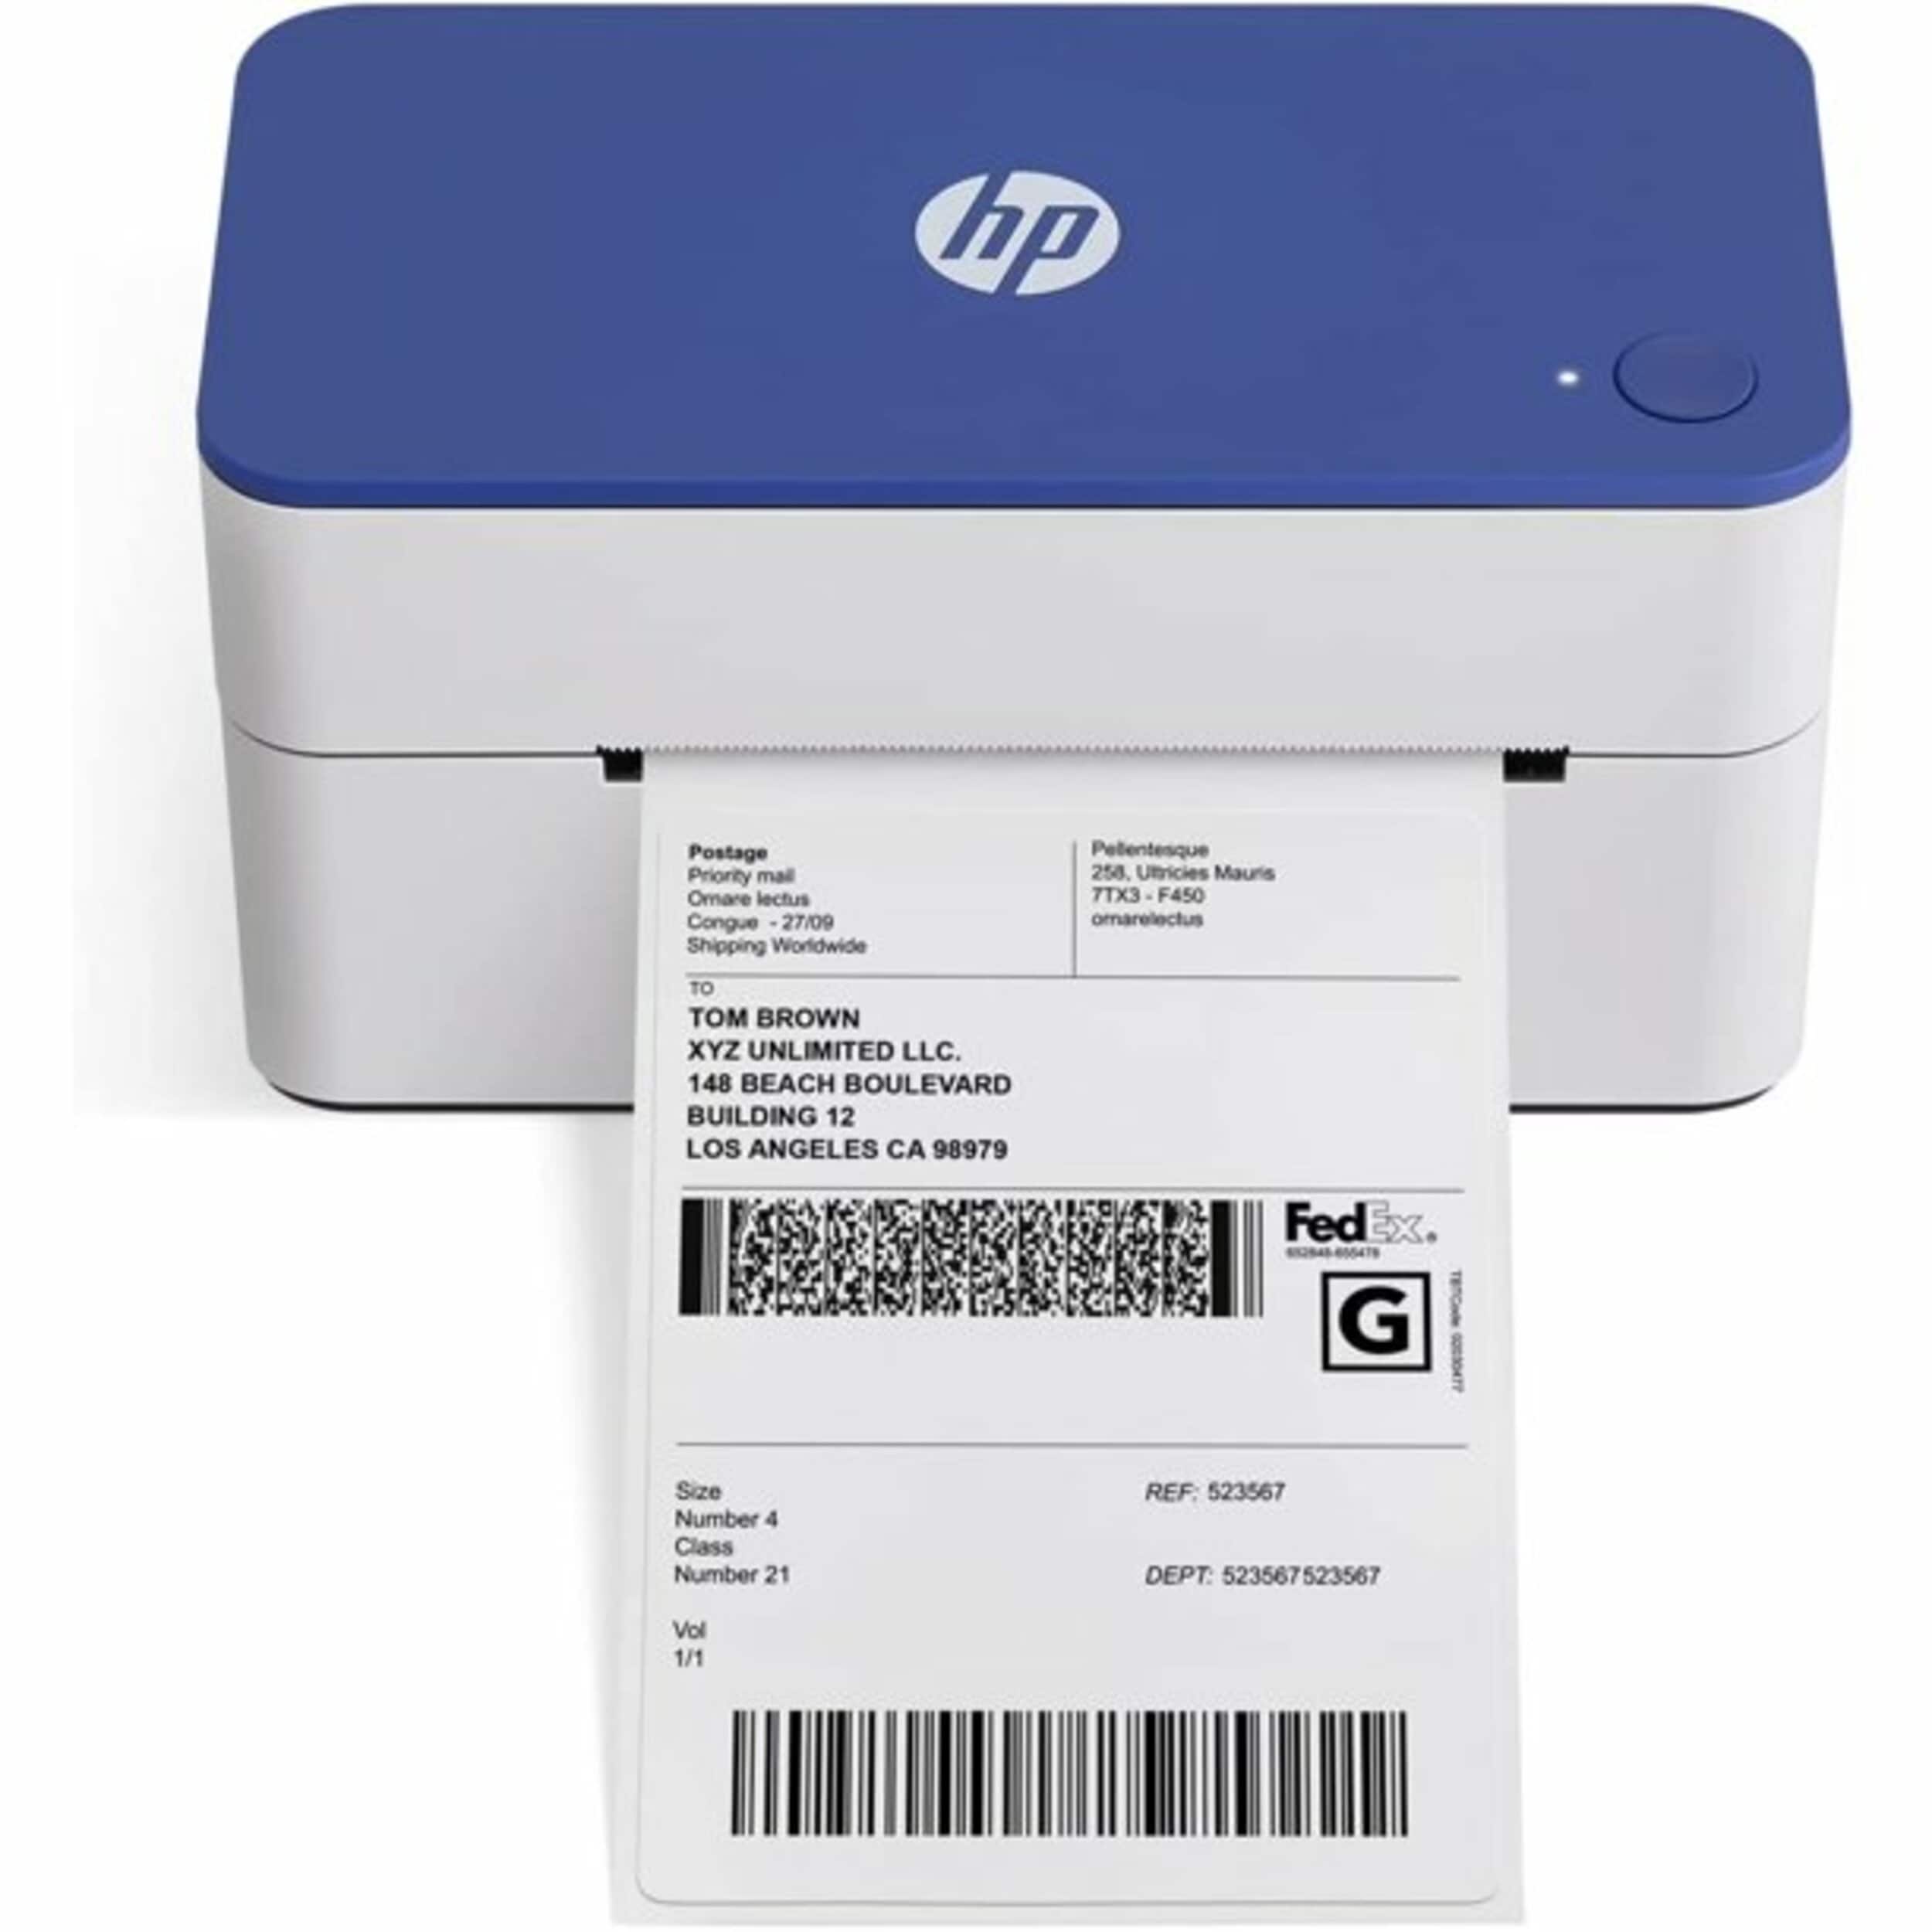 Vlucht Lyrisch visueel HP Shipping Label Printer, 4X6 Compact Thermal Label Printer, 300 Dpi  Thermal Printer For Home Office in the Printers department at Lowes.com